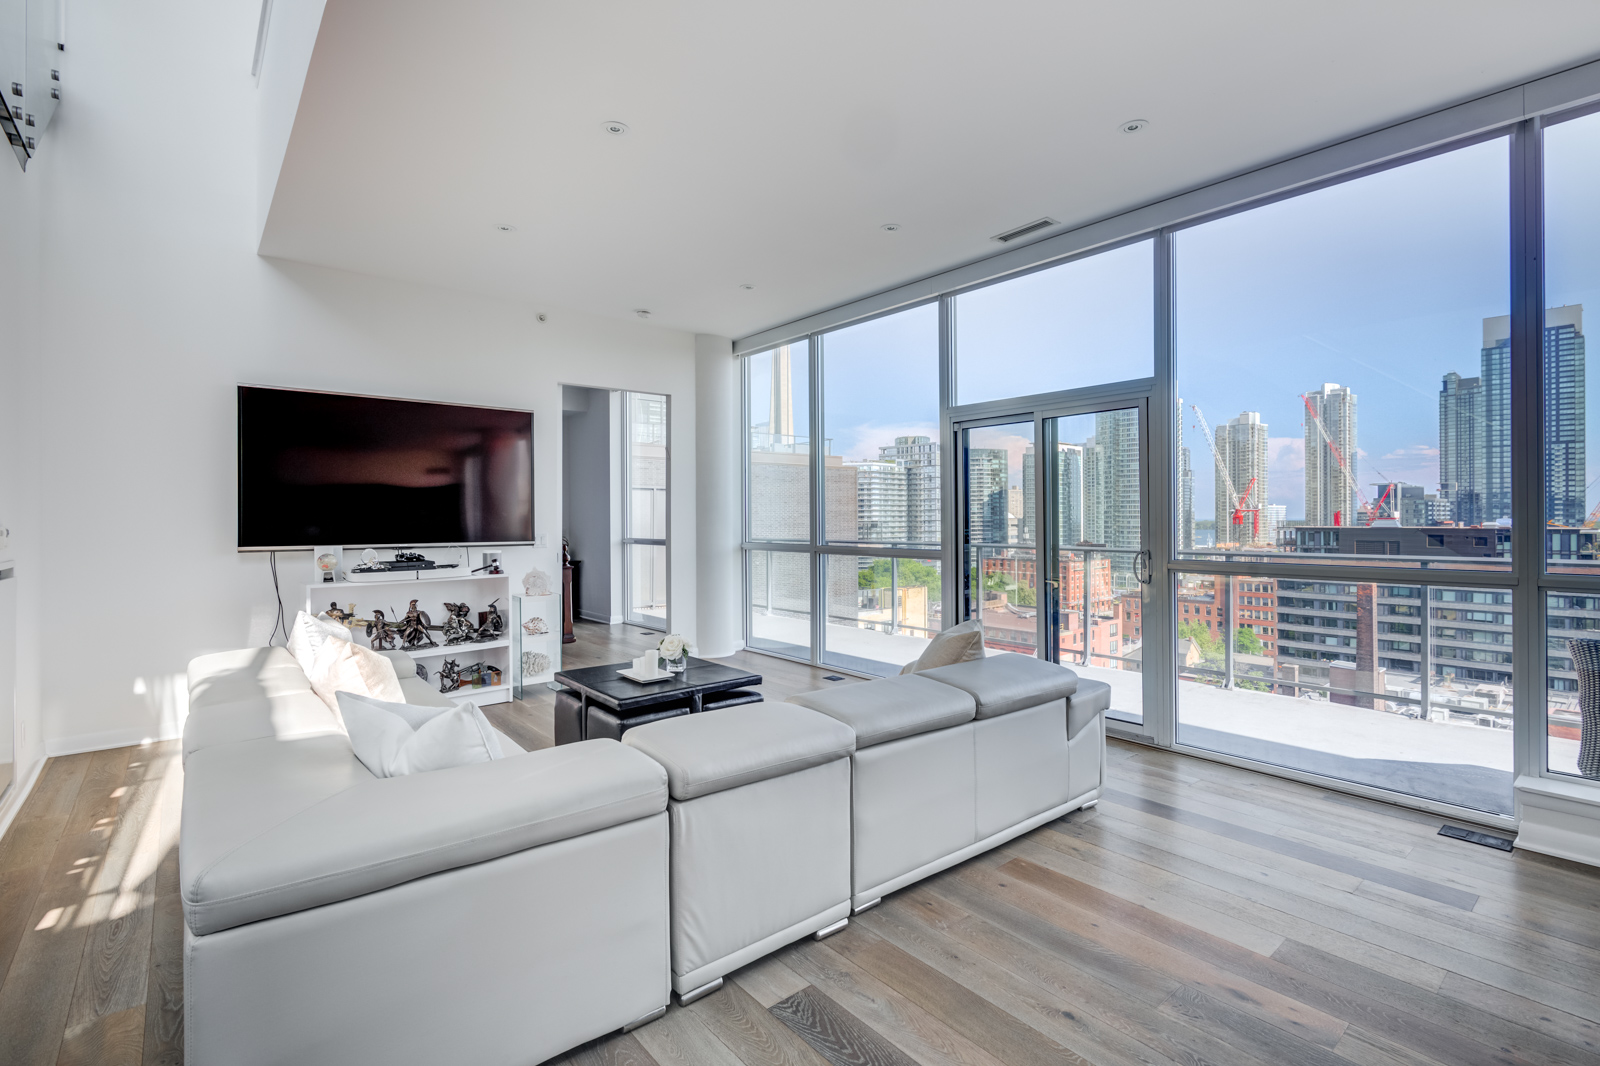 Open concept living room with furniture and windows - Victory Lofts Penthouse Suite in 478 King St W Toronto.